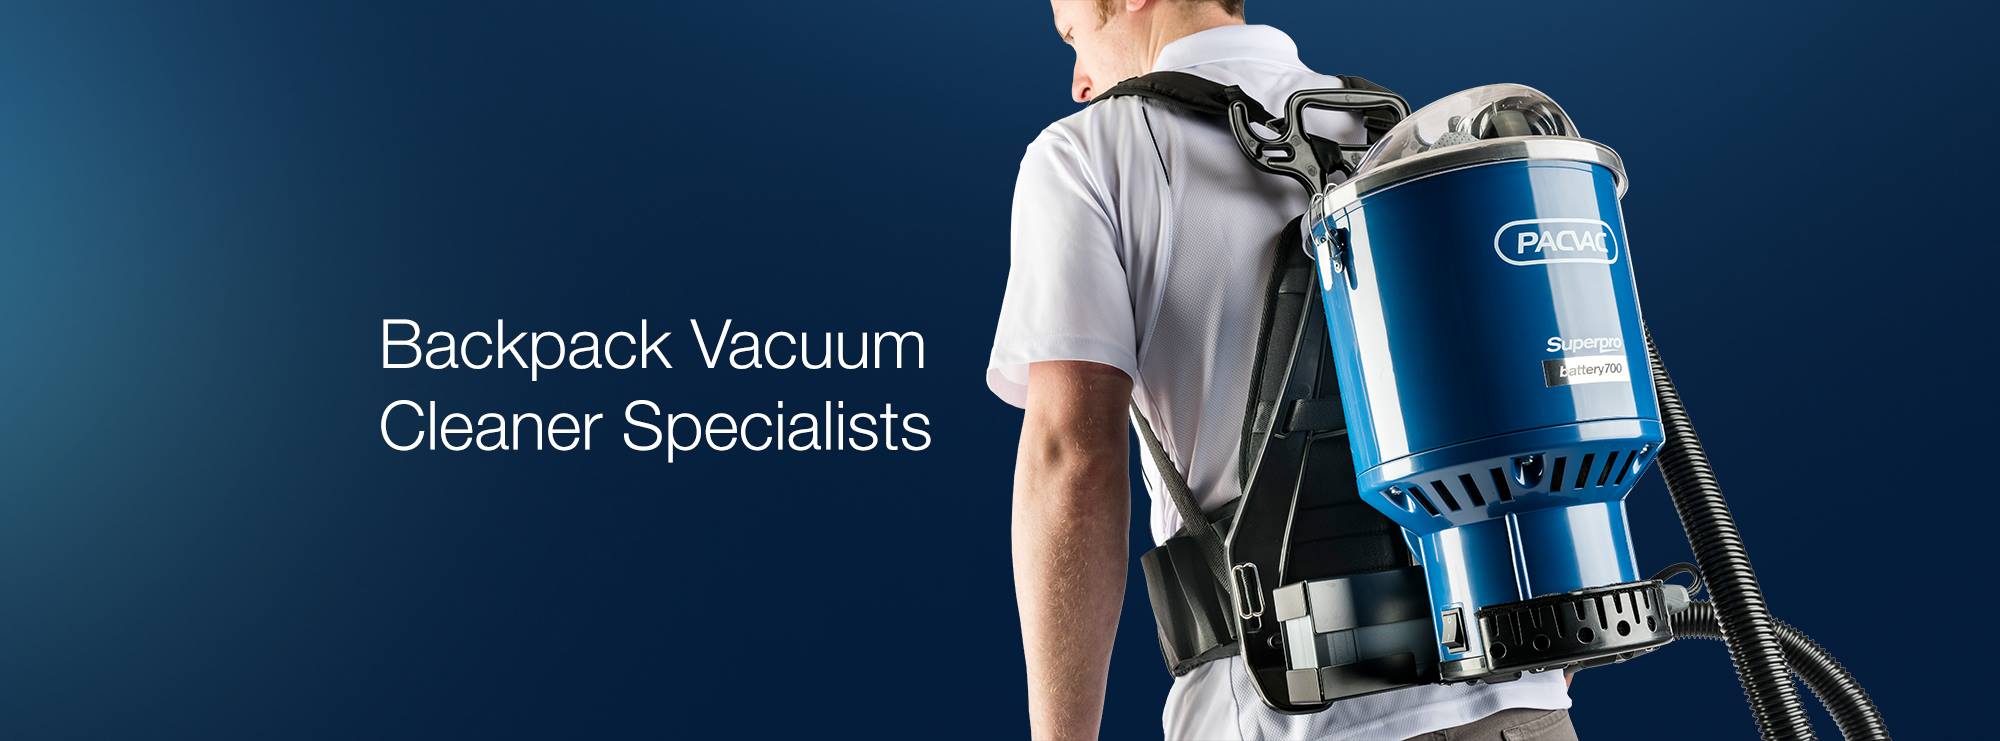 Pacvac - Backpack Vacuum Cleaner Specialists